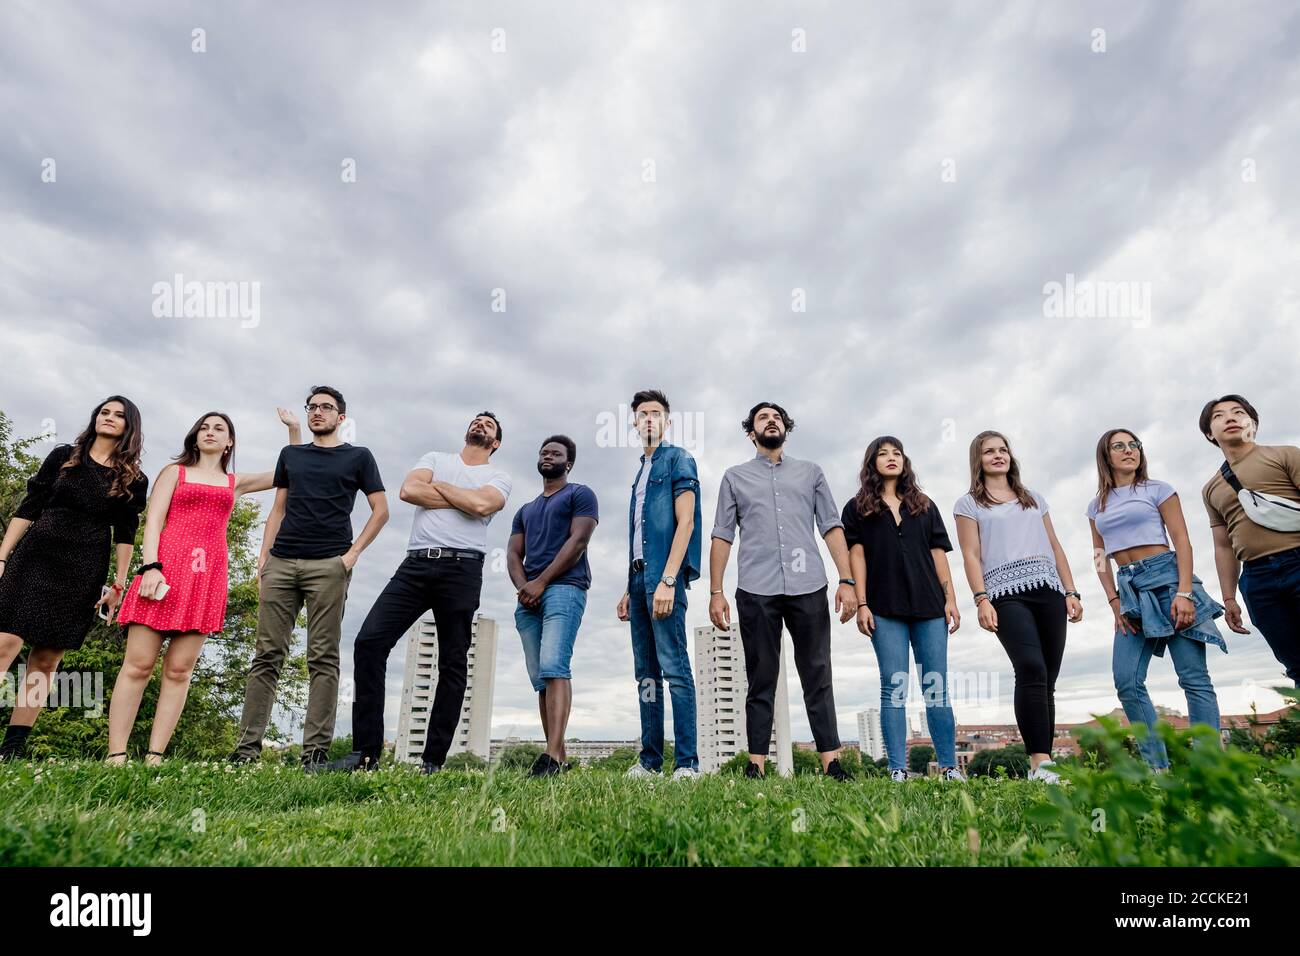 Group of friends standing side by side on grassy land against sky in park Stock Photo